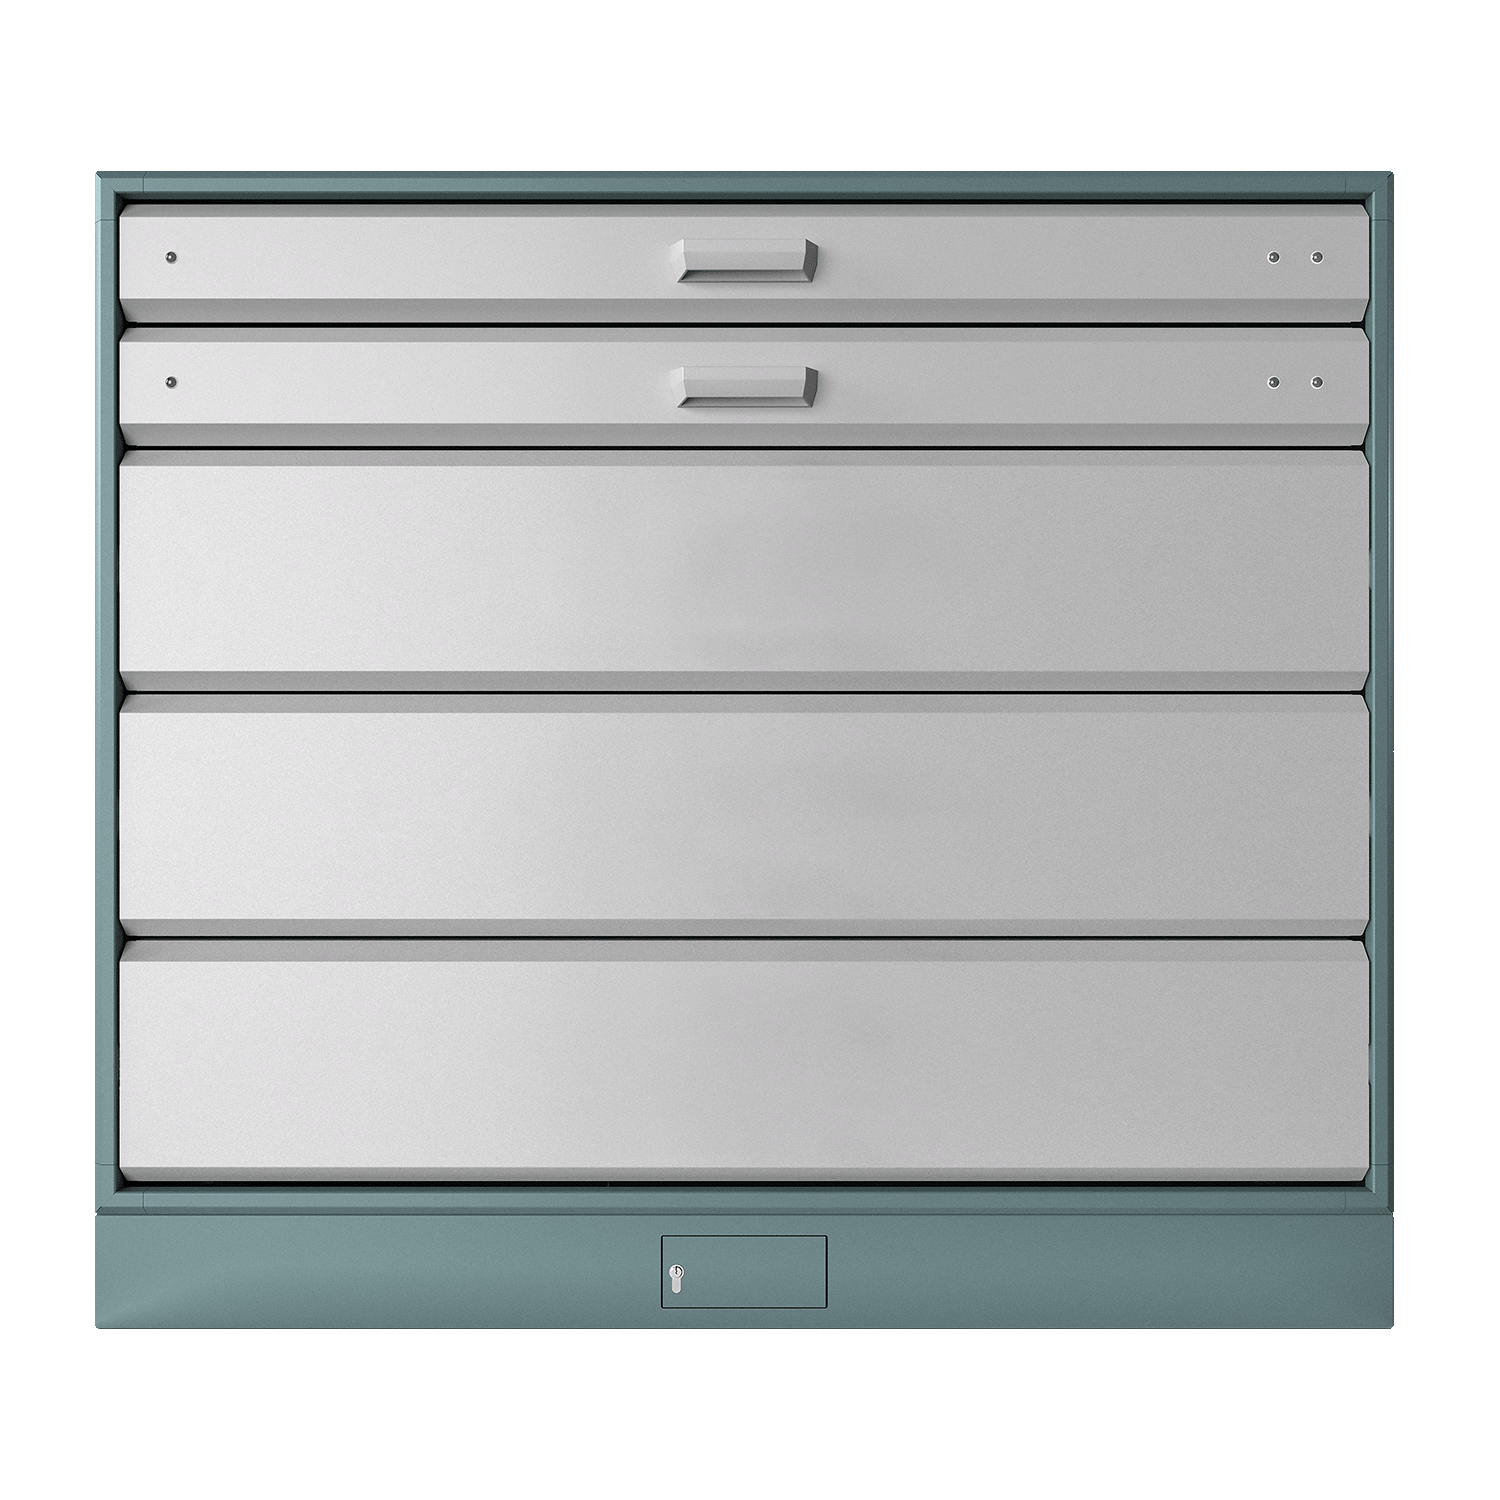 Rifle Locker WDC 2 with 2 weapon drawers